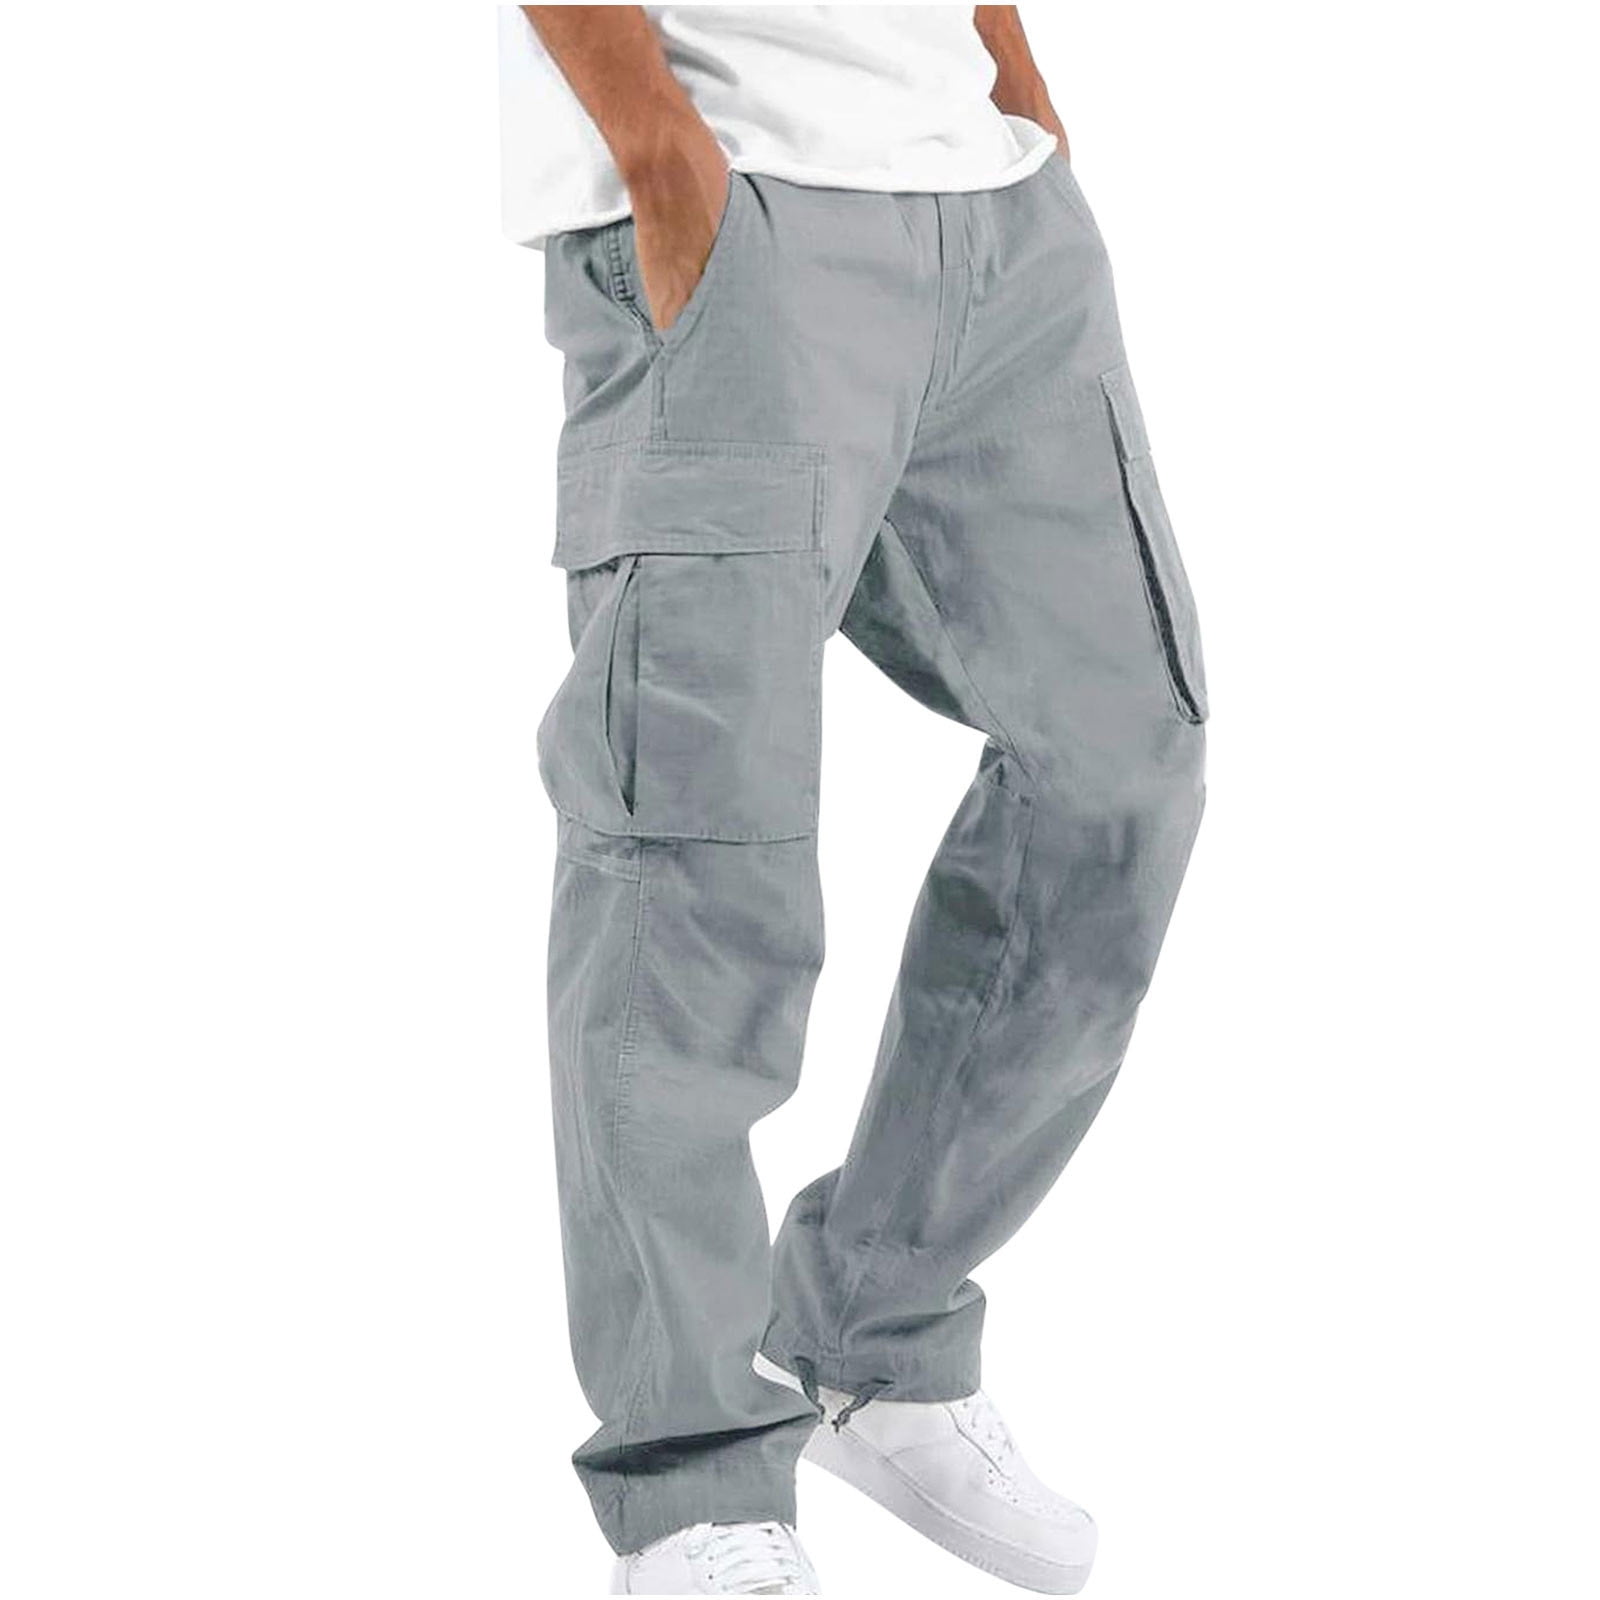 Men's Slim Fit Polyester Track Pants - 4 Pocket Cargo Style Lower for  Sports, Running, Gym